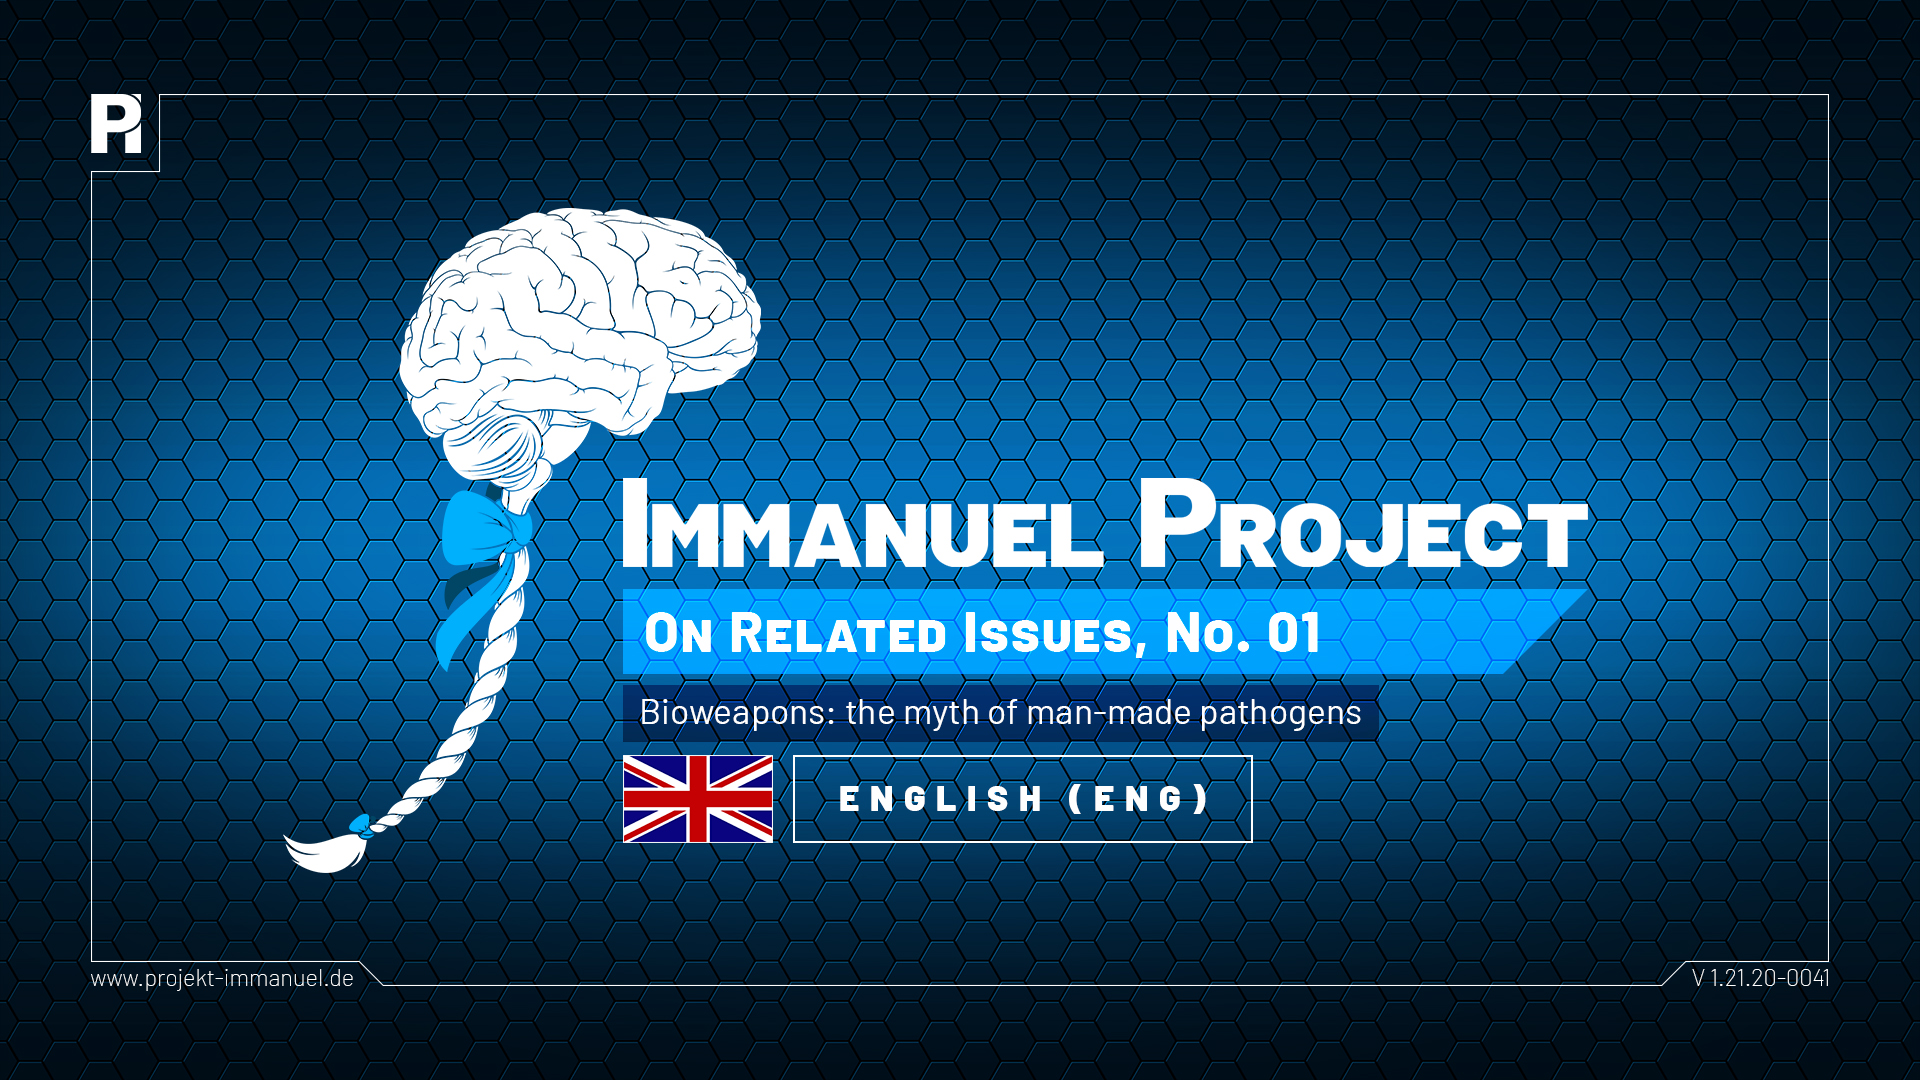 Immanuel Project - O.R.I., No. 01: bioweapons - the myth of man-made pathogens 🇬🇧